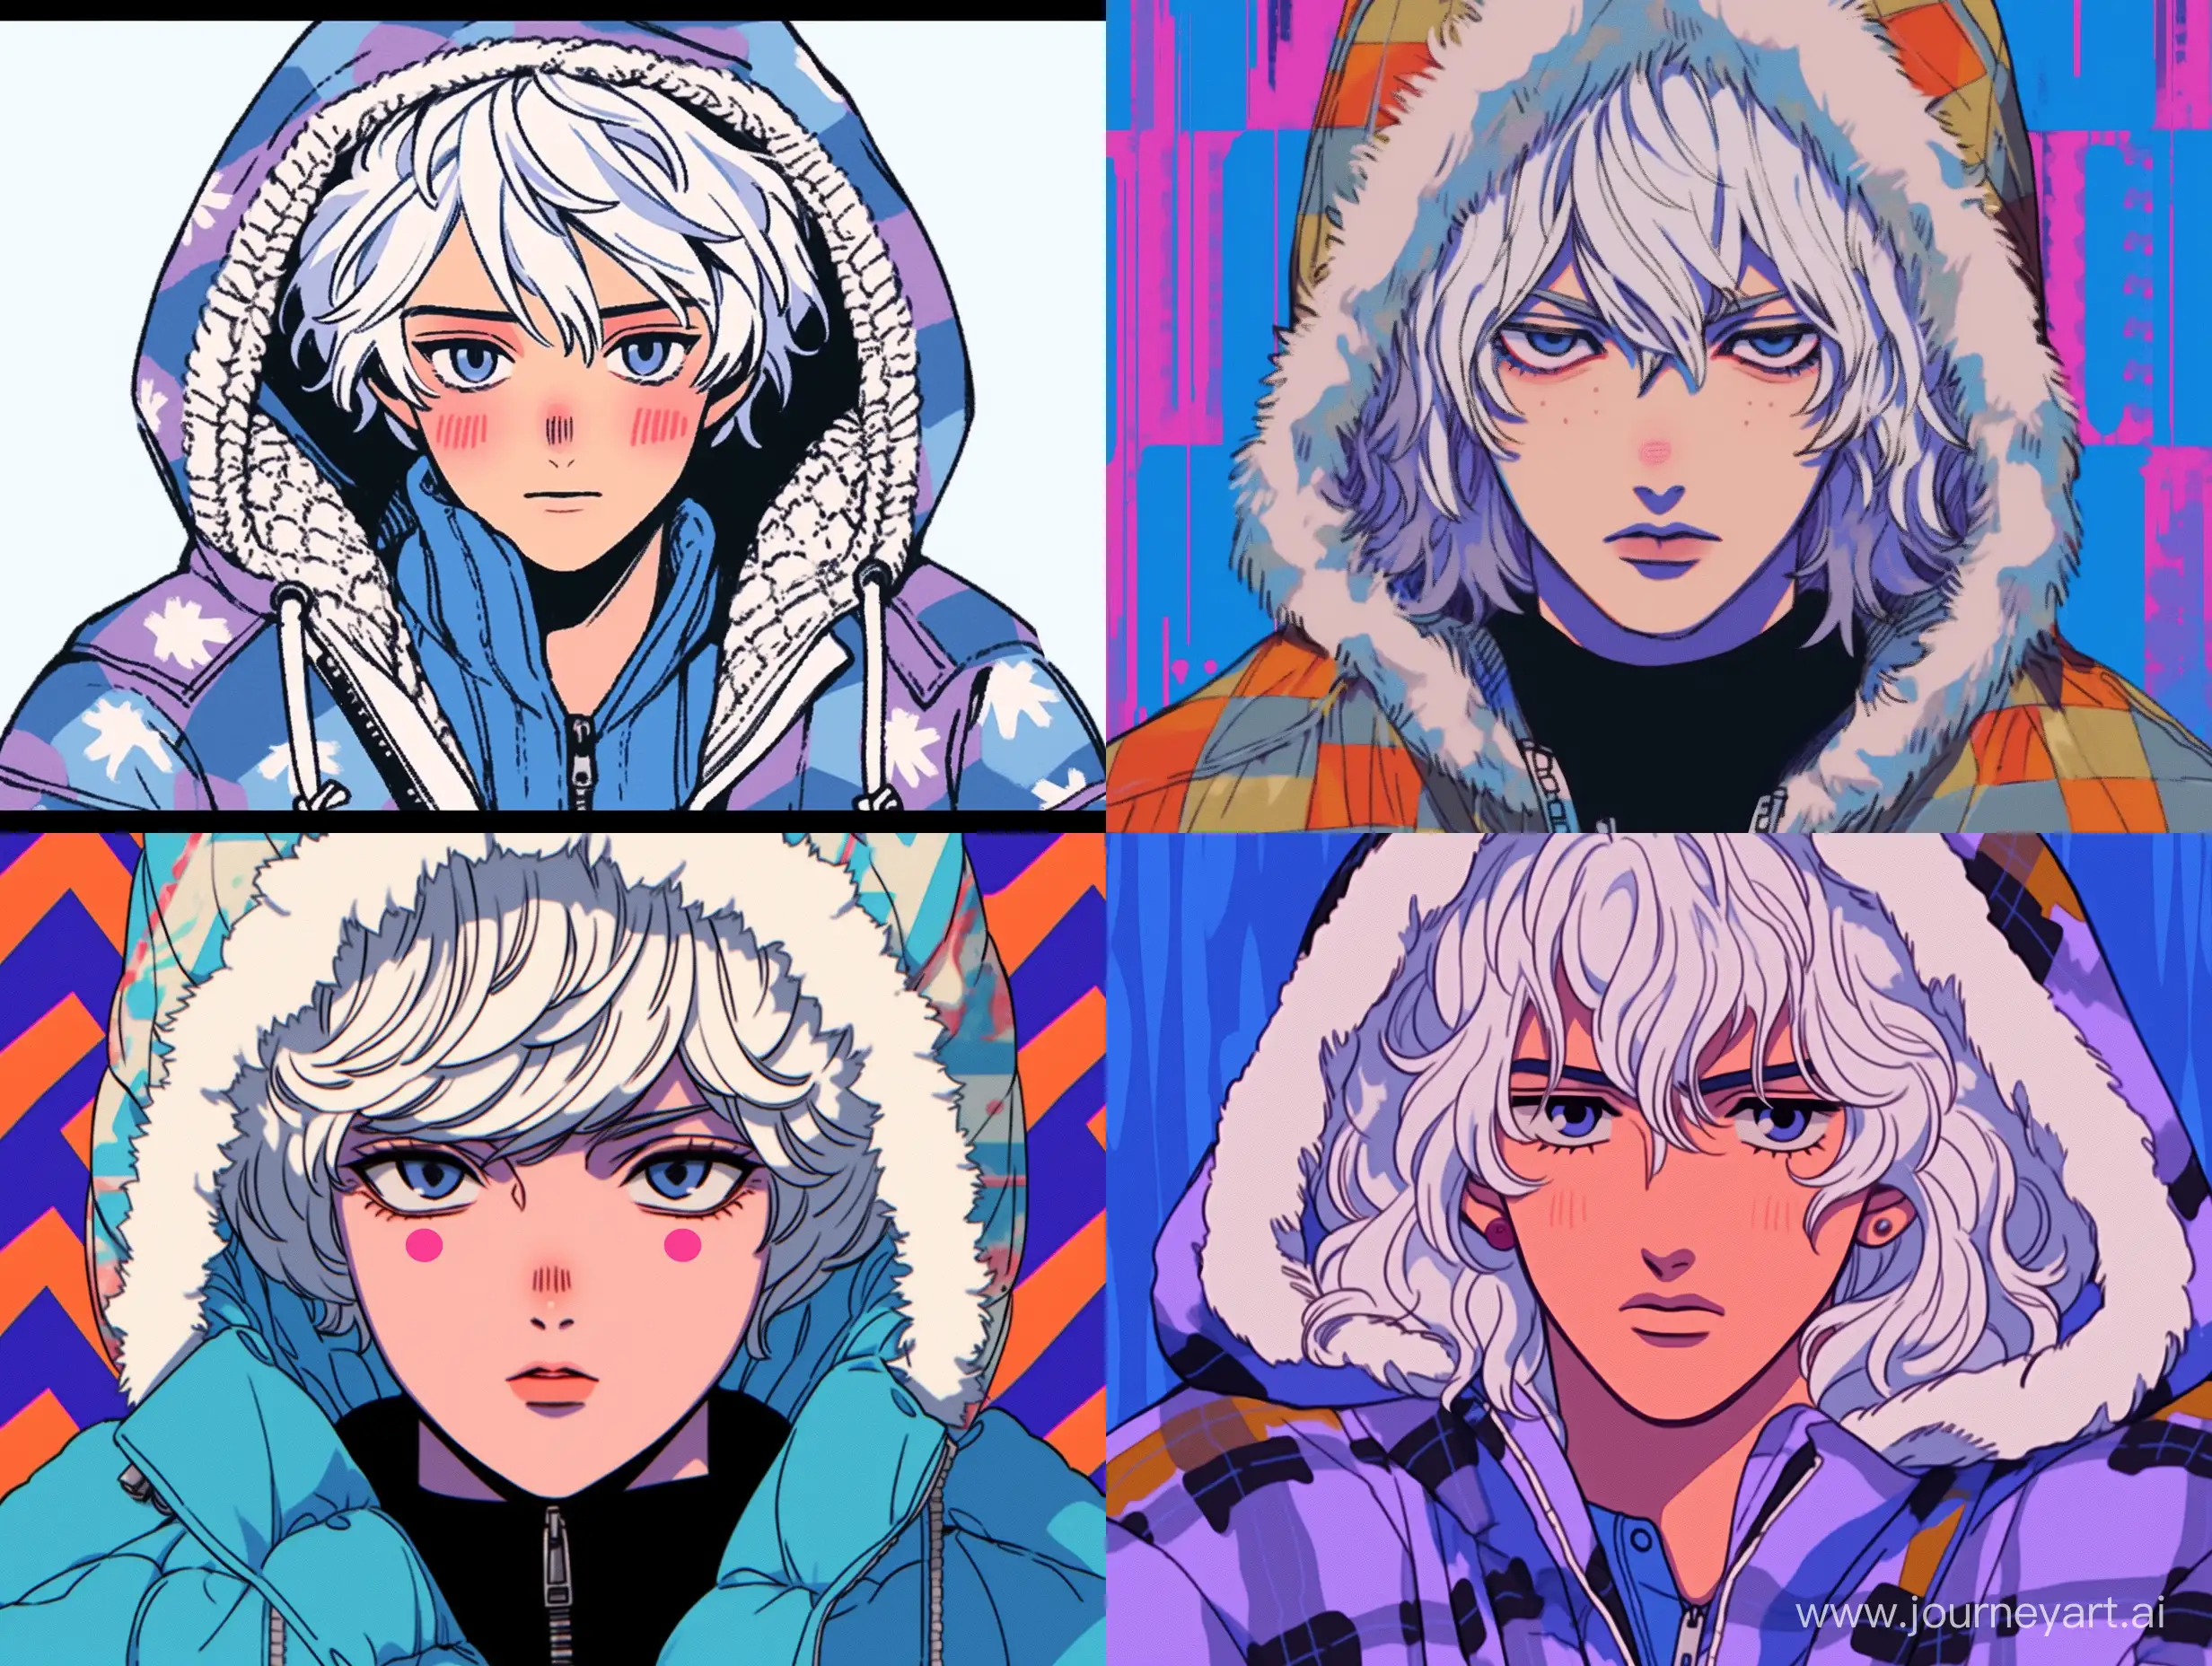 Androgynous-Figure-with-White-Hair-in-Stylish-Blue-Jacket-and-Checkered-Vest